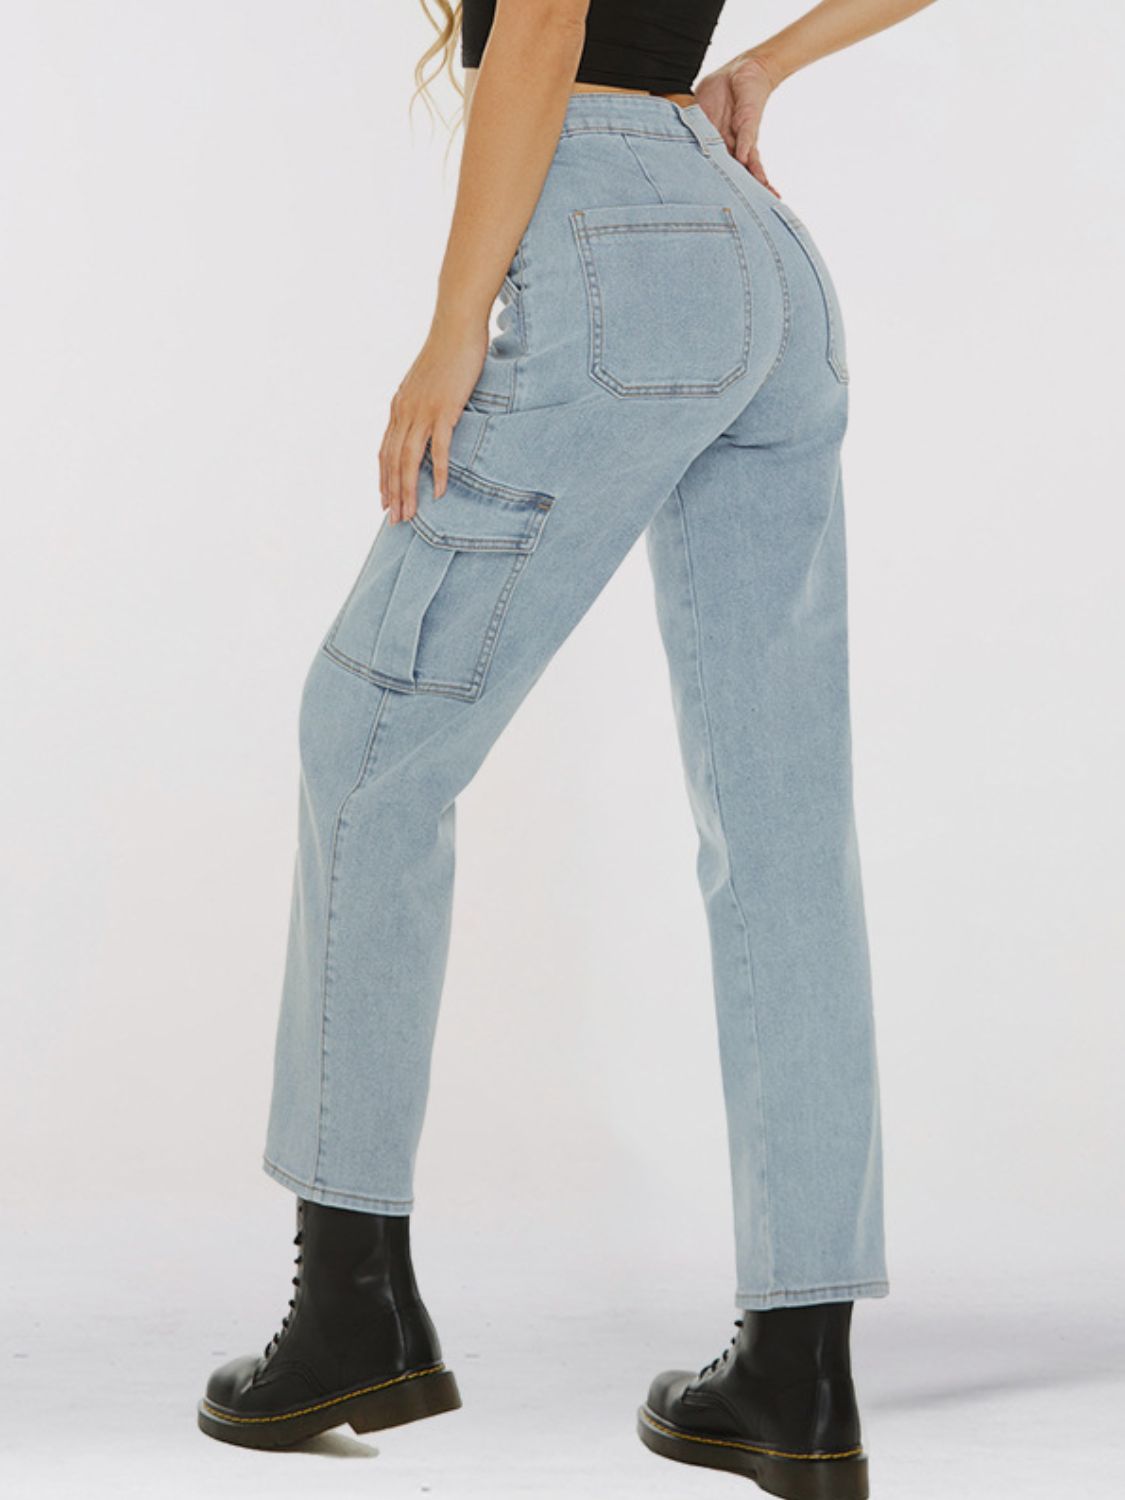 Light Gray Straight Leg Jeans with Pockets Sentient Beauty Fashions Apparel & Accessories